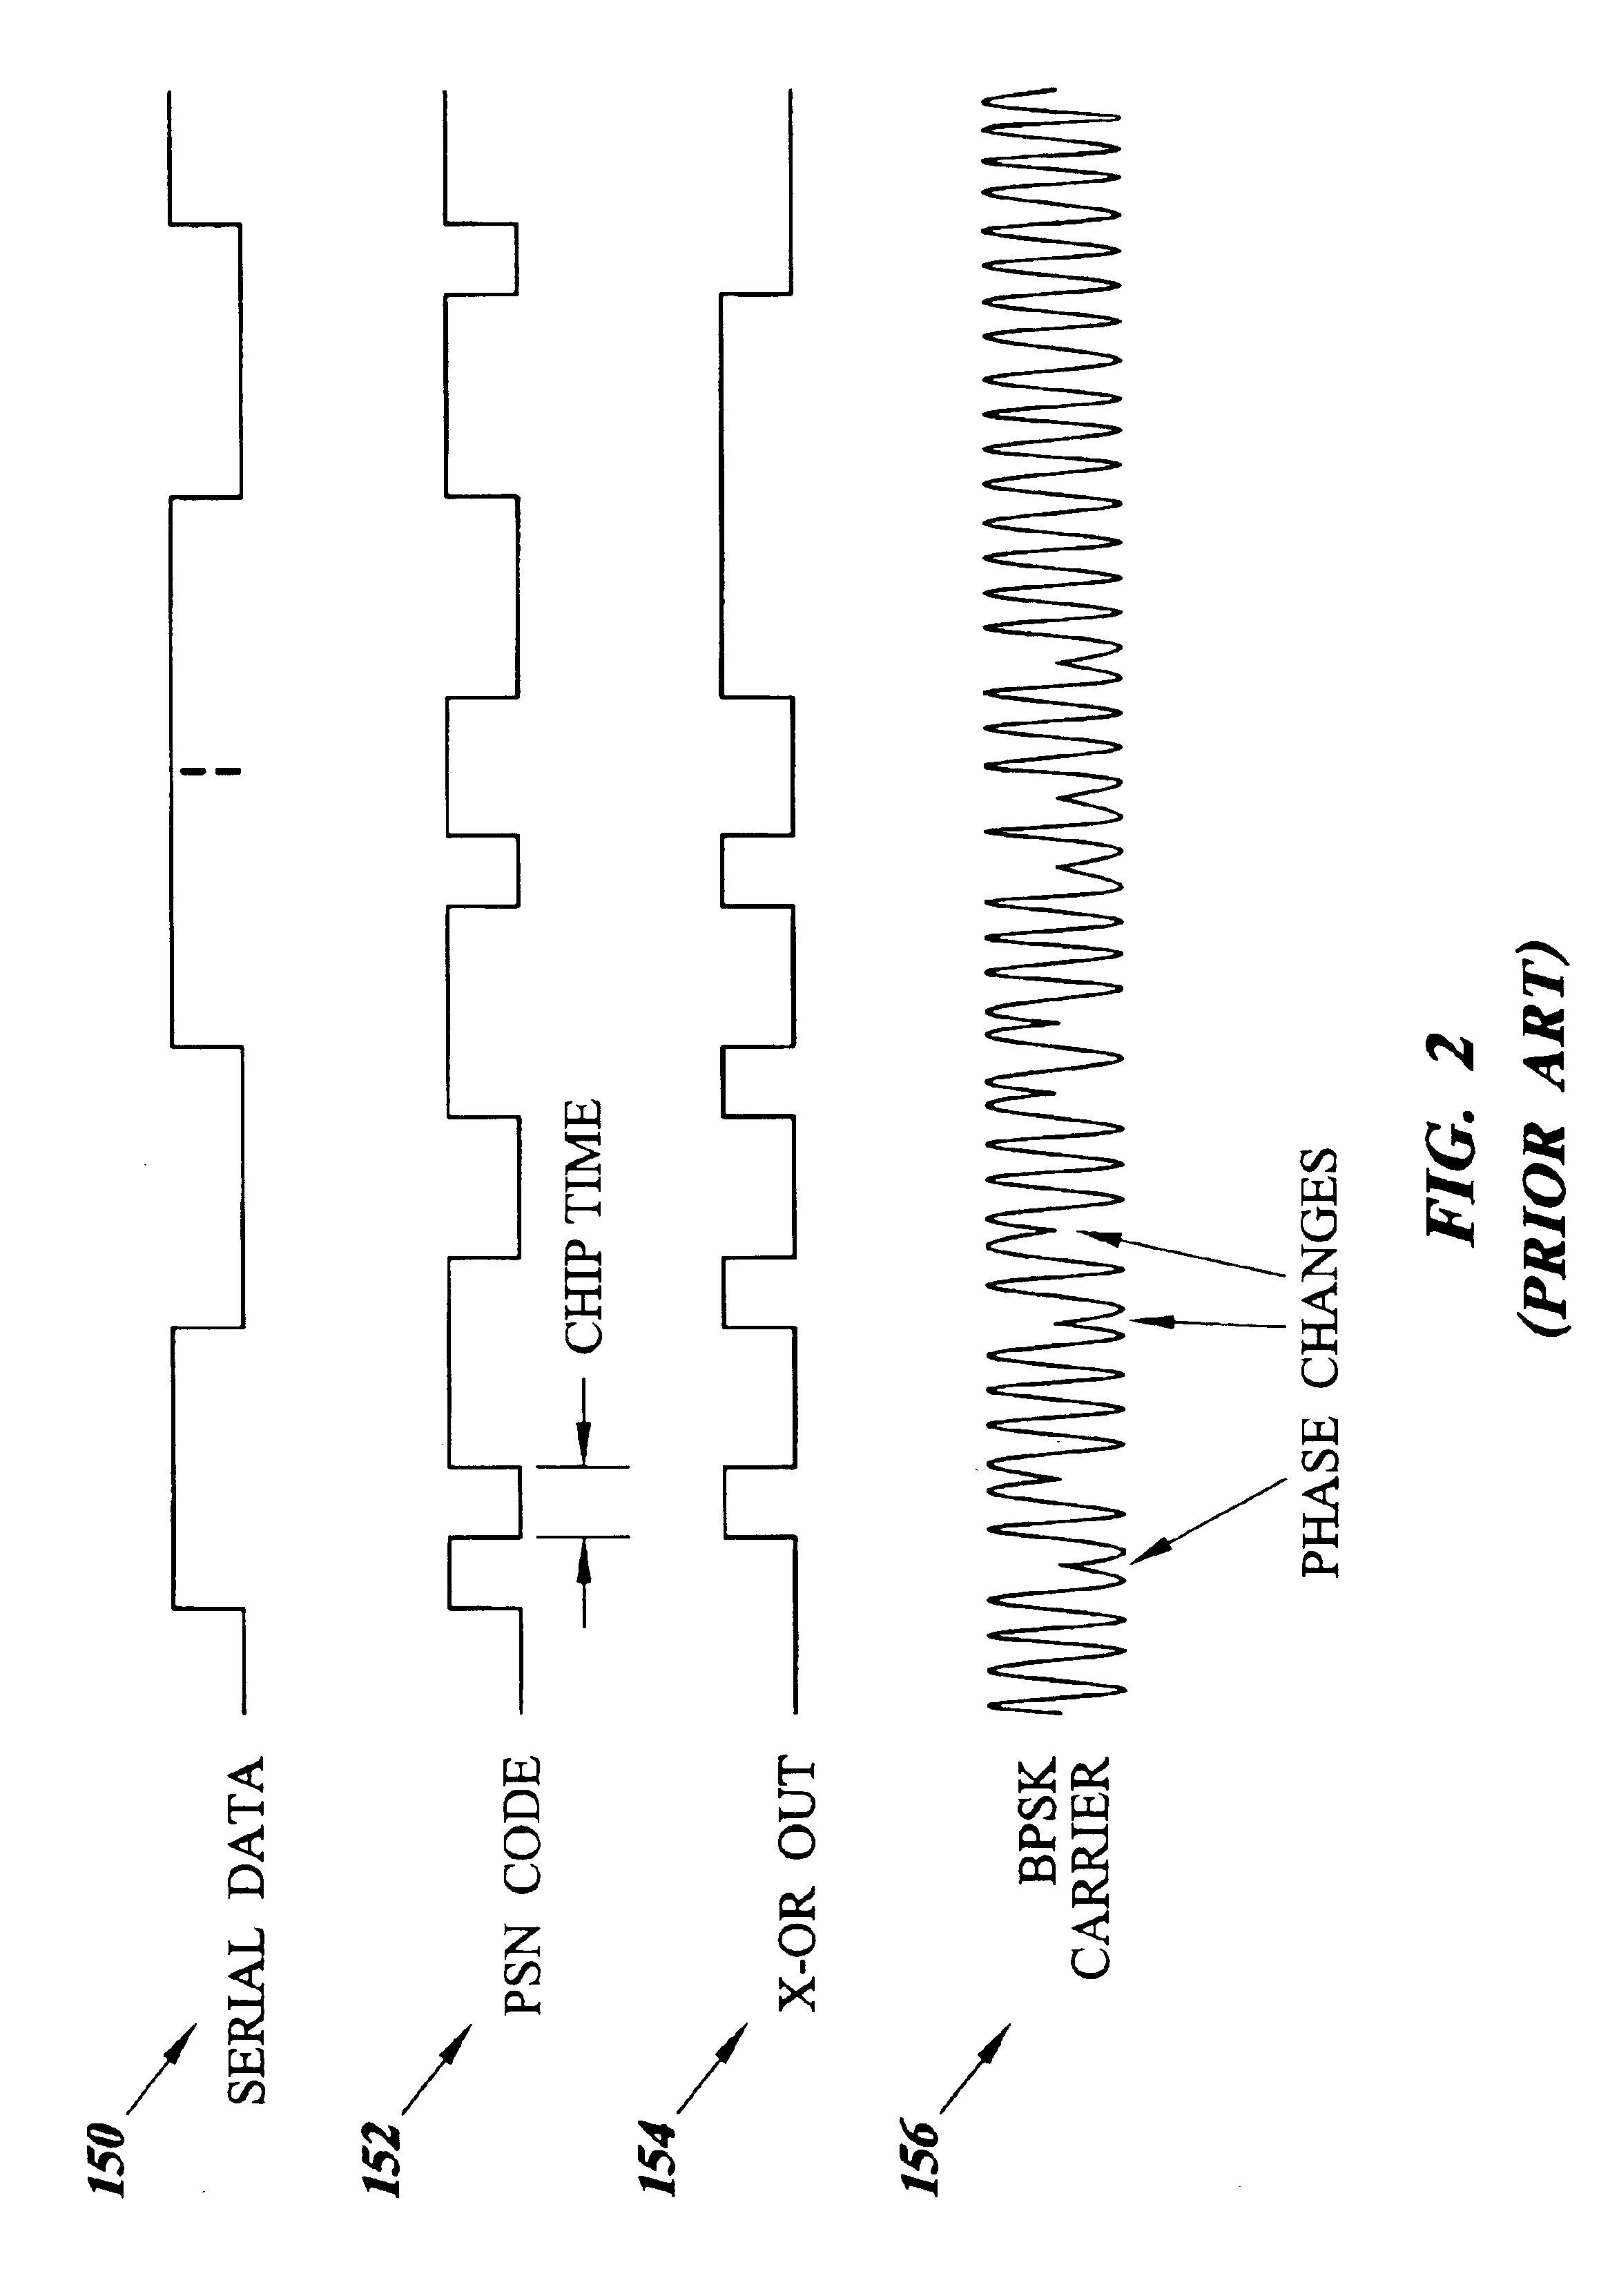 Methods and systems for optimizing signal transmission power levels in a spread spectrum communication system